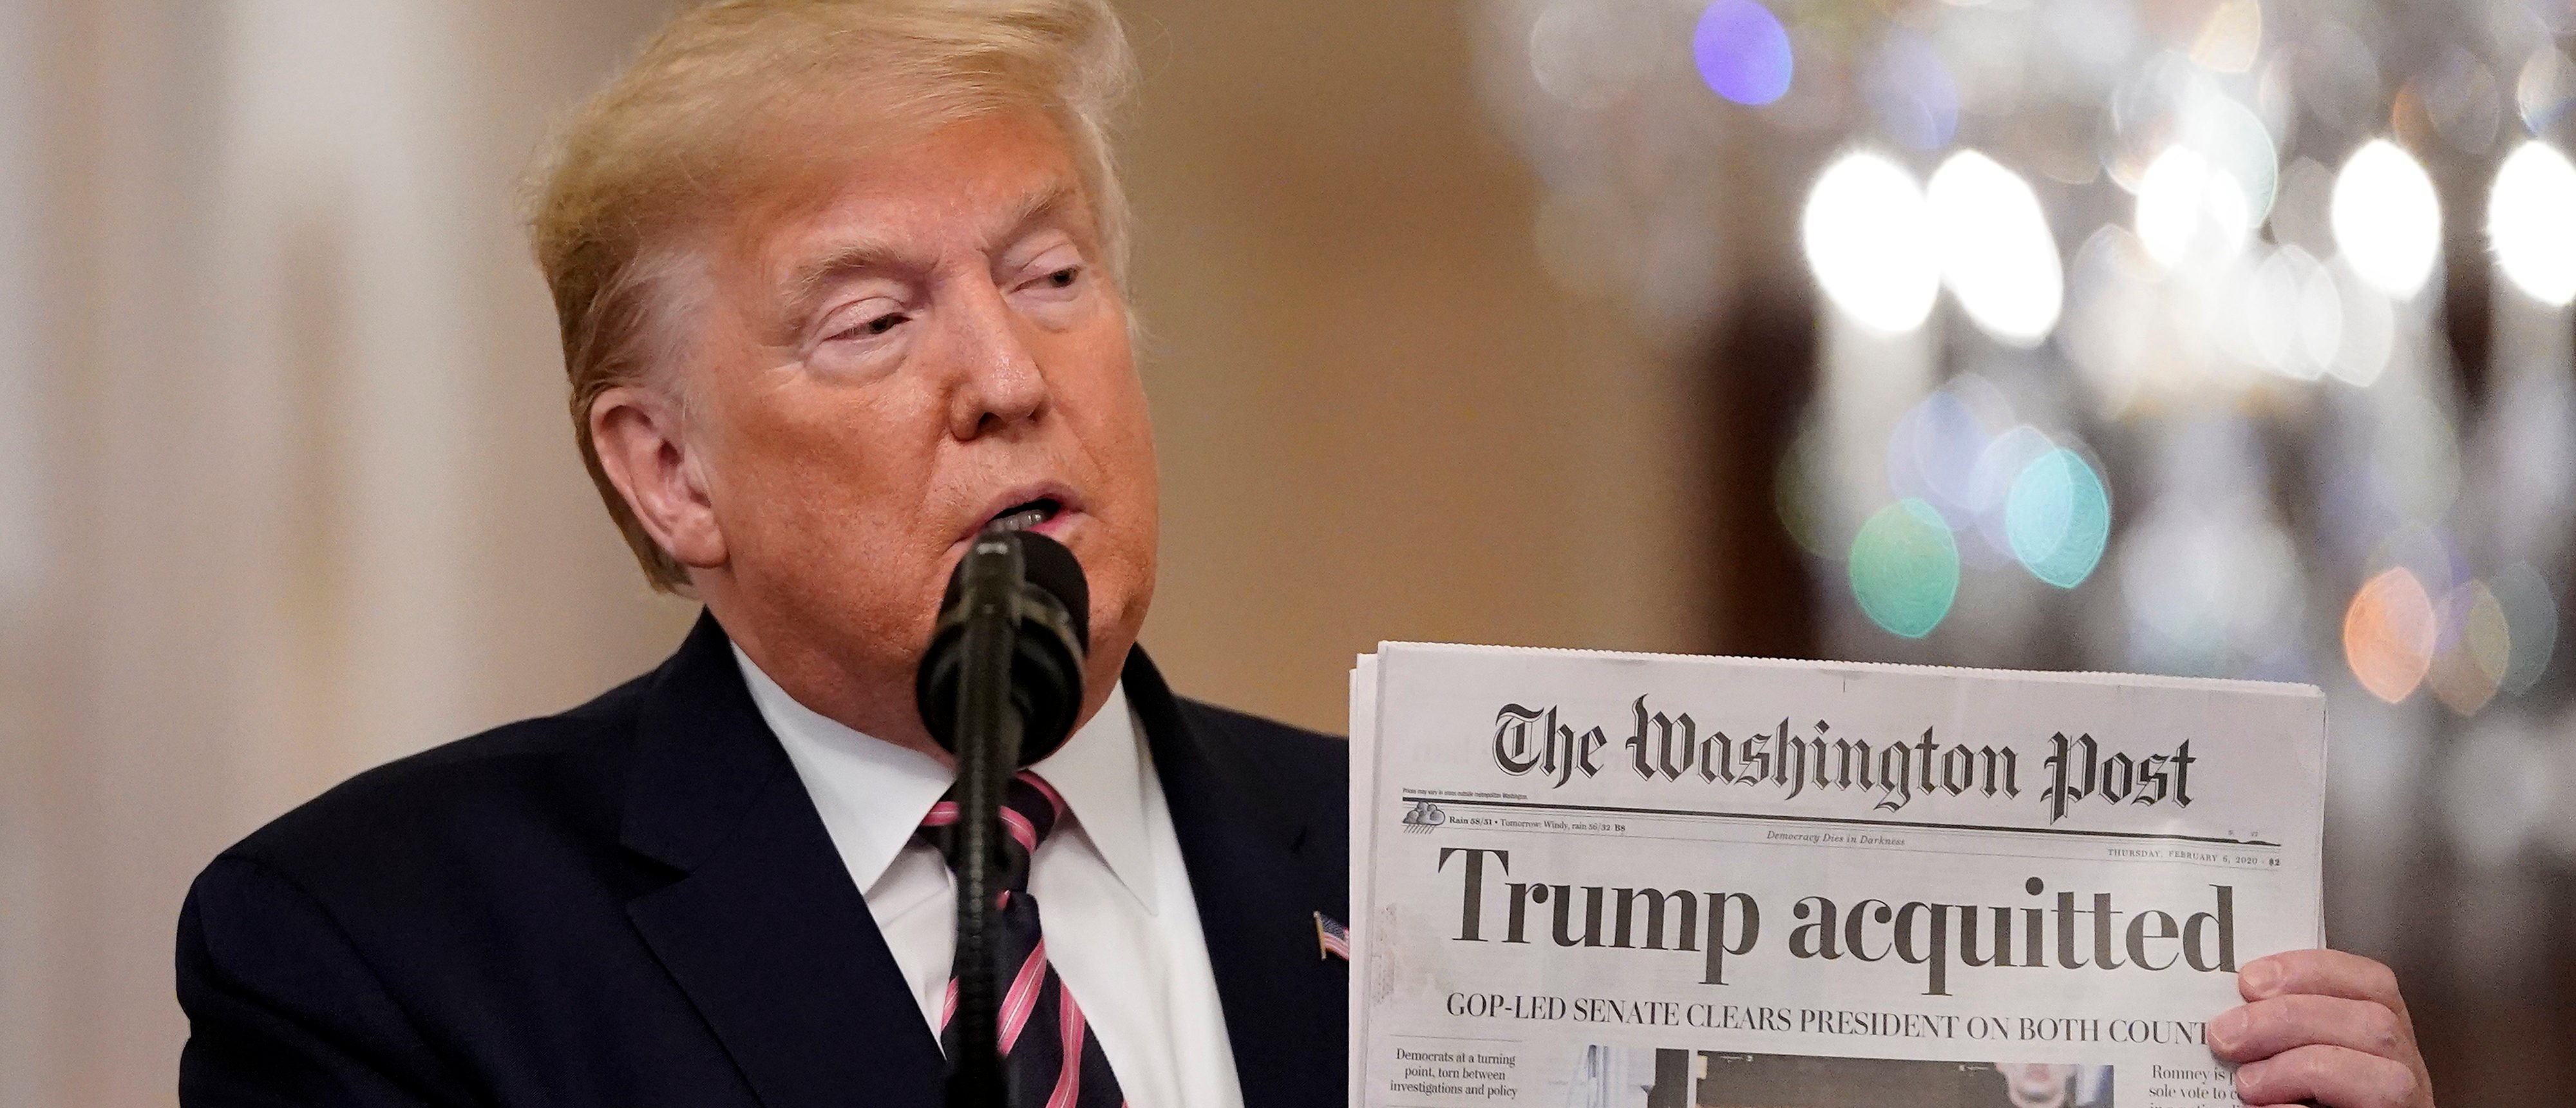 WASHINGTON, DC - FEBRUARY 06: U.S. President Donald Trump holds a copy of The Washington Post as he speaks in the East Room of the White House one day after the U.S. Senate acquitted on two articles of impeachment, ion February 6, 2020 in Washington, DC. After five months of congressional hearings and investigations about President Trump’s dealings with Ukraine, the U.S. Senate formally acquitted the president on Wednesday of charges that he abused his power and obstructed Congress. (Photo by Drew Angerer/Getty Images)